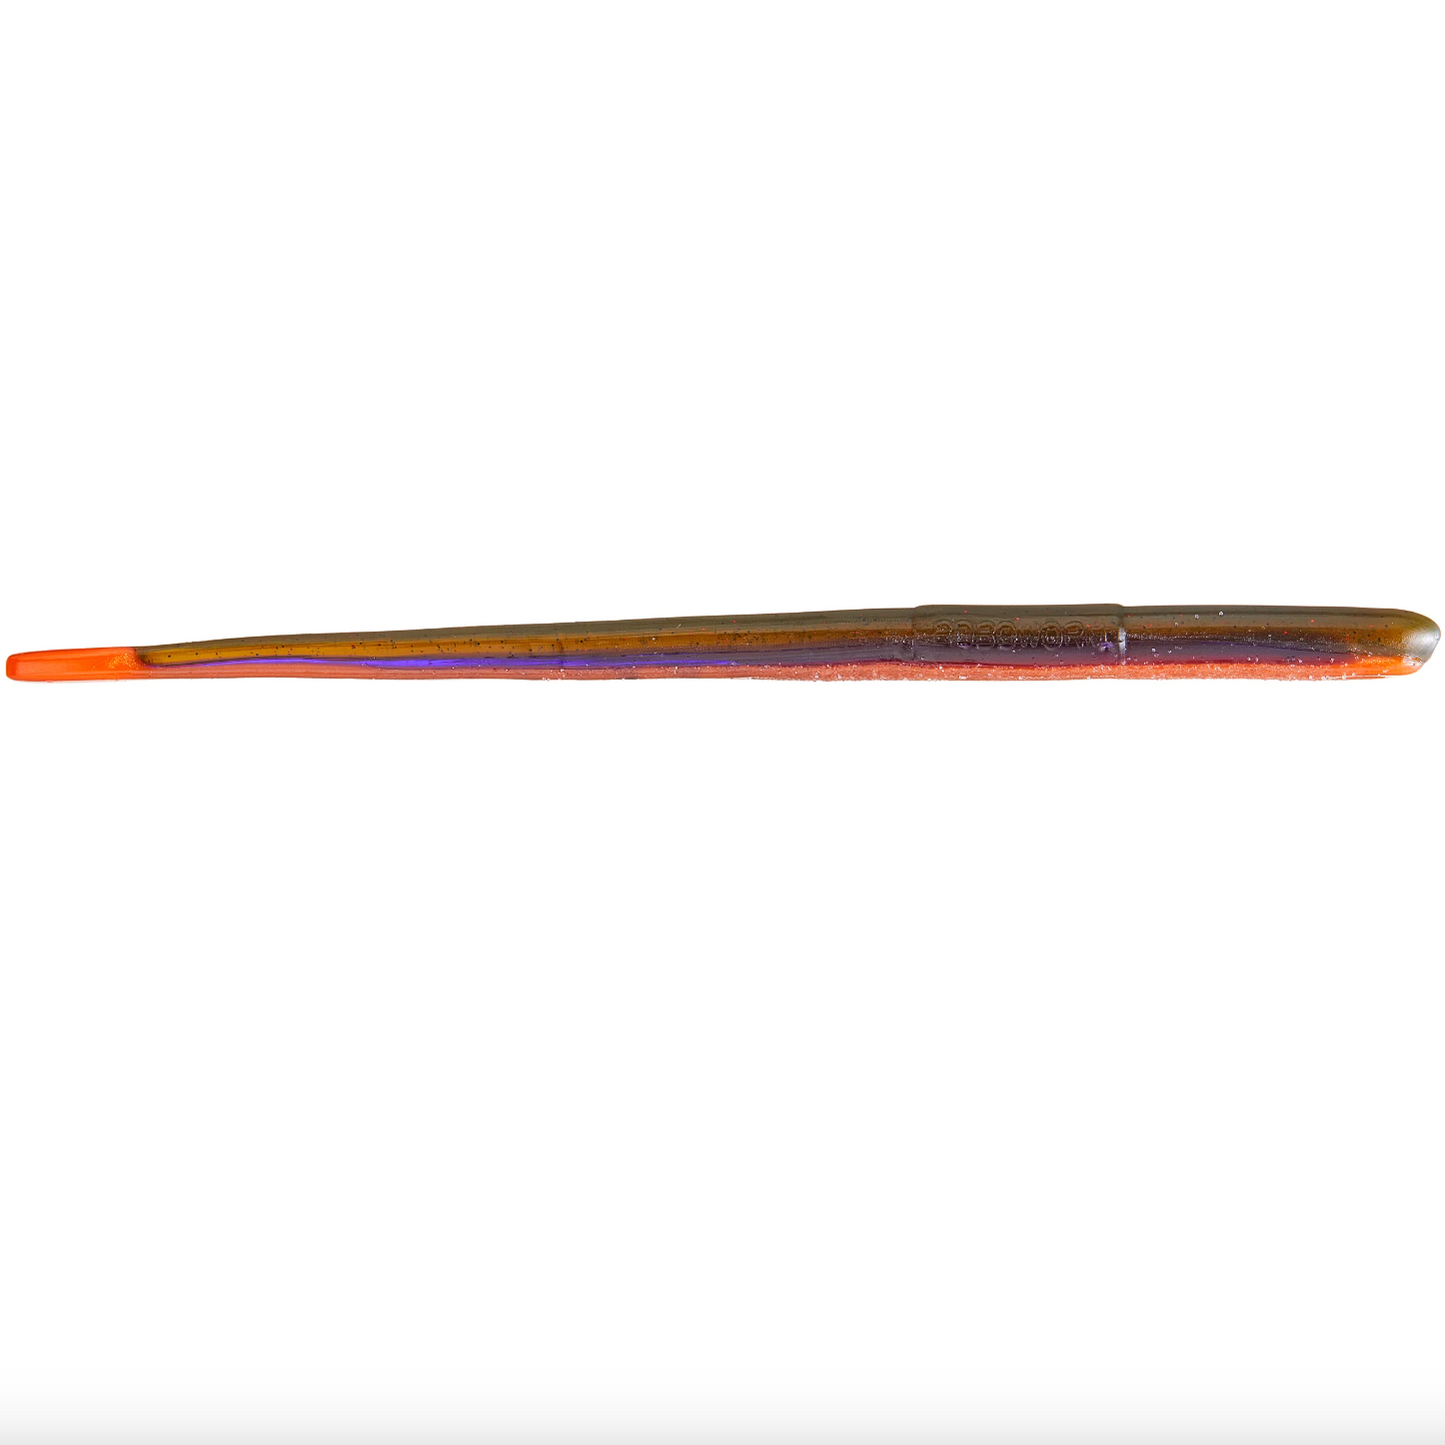 Roboworm 4.5'' Straight Tail